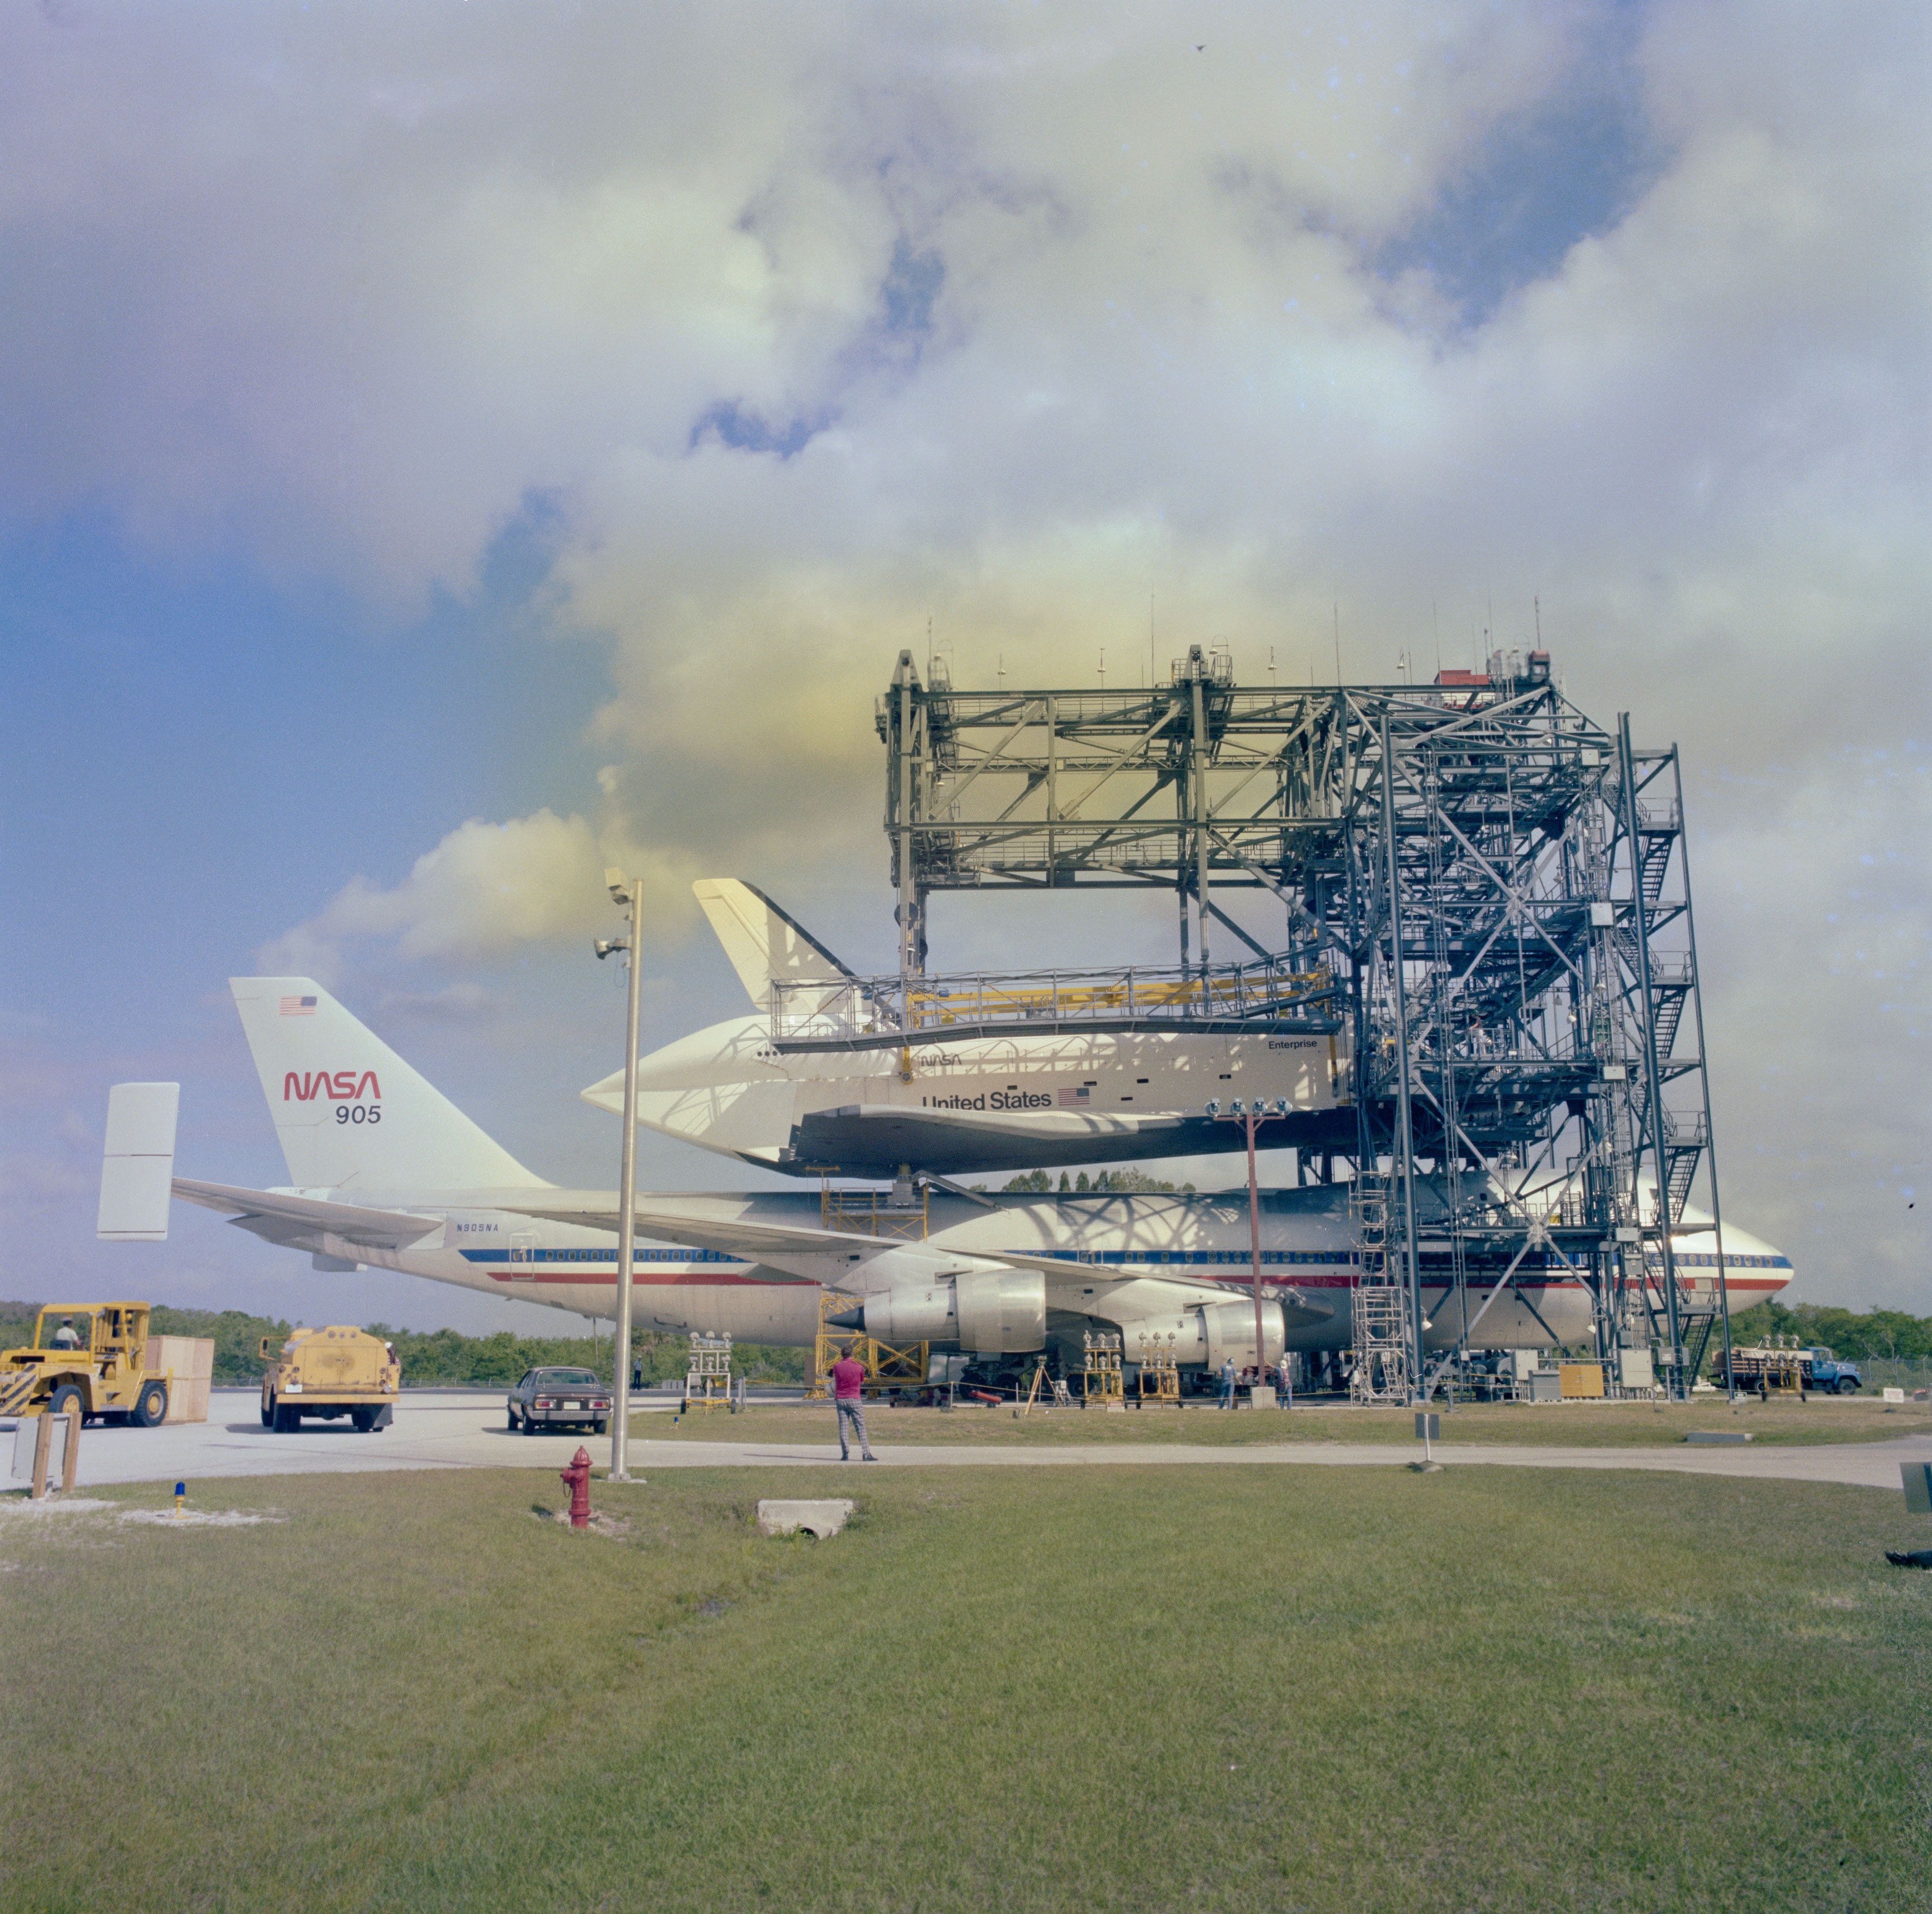 Enterprise atop its Shuttle Carrier Aircraft (SCA) touches down on the runway at NASA’s Kennedy Space Center in Florida